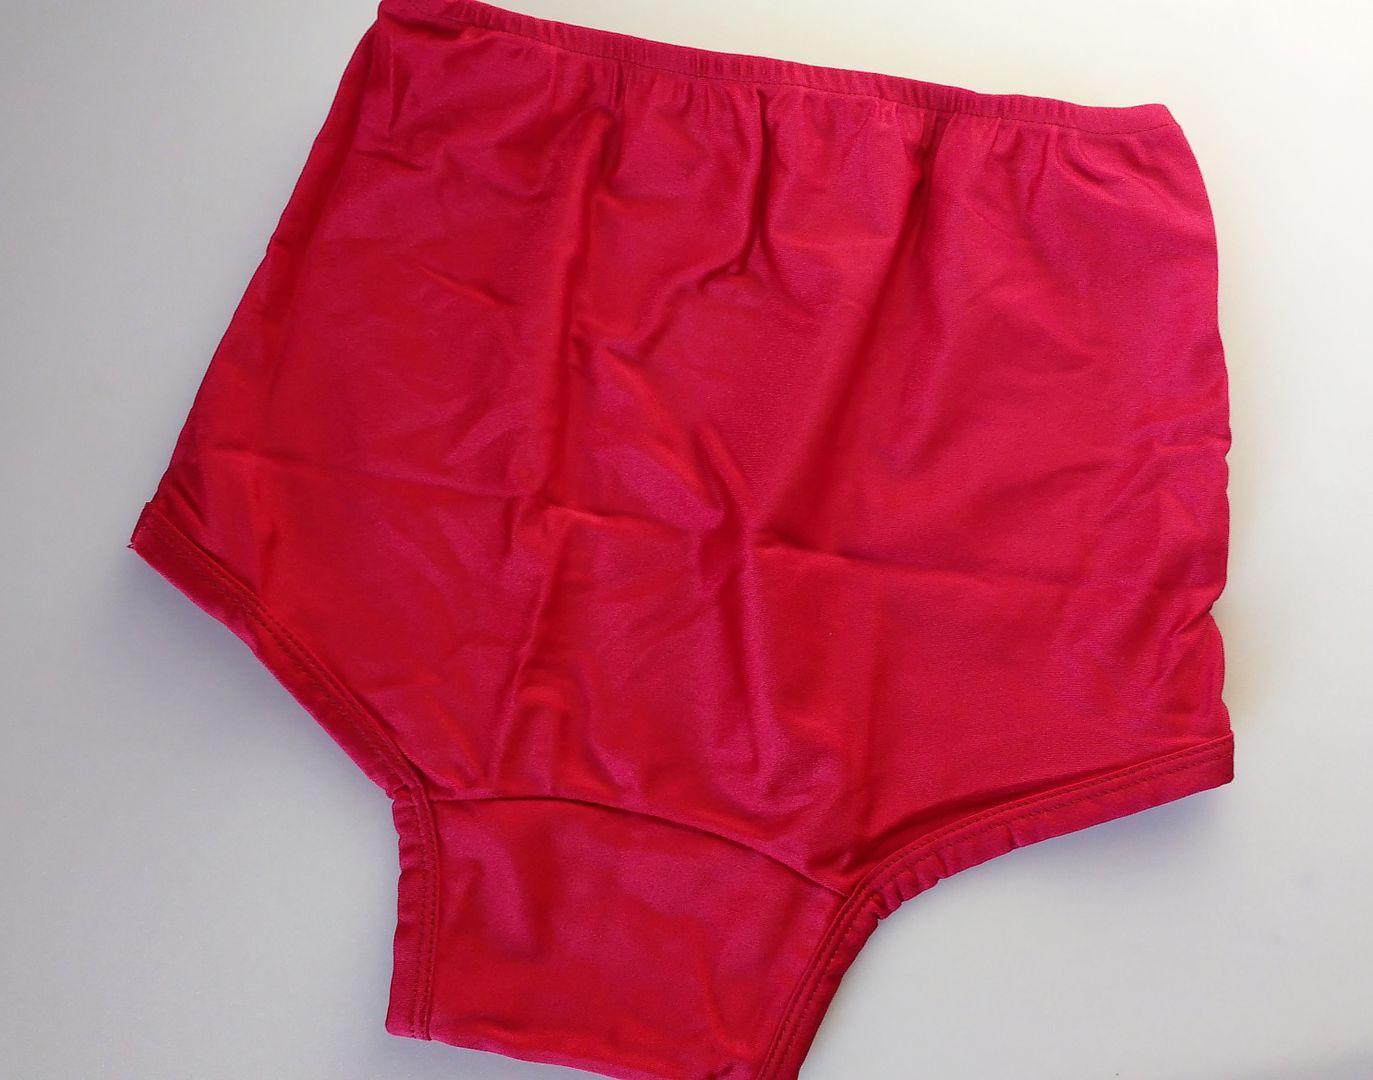 BLOOD RED Nylon Spandex Sports Netball Gym Panties Knickers Briefs UK L ...